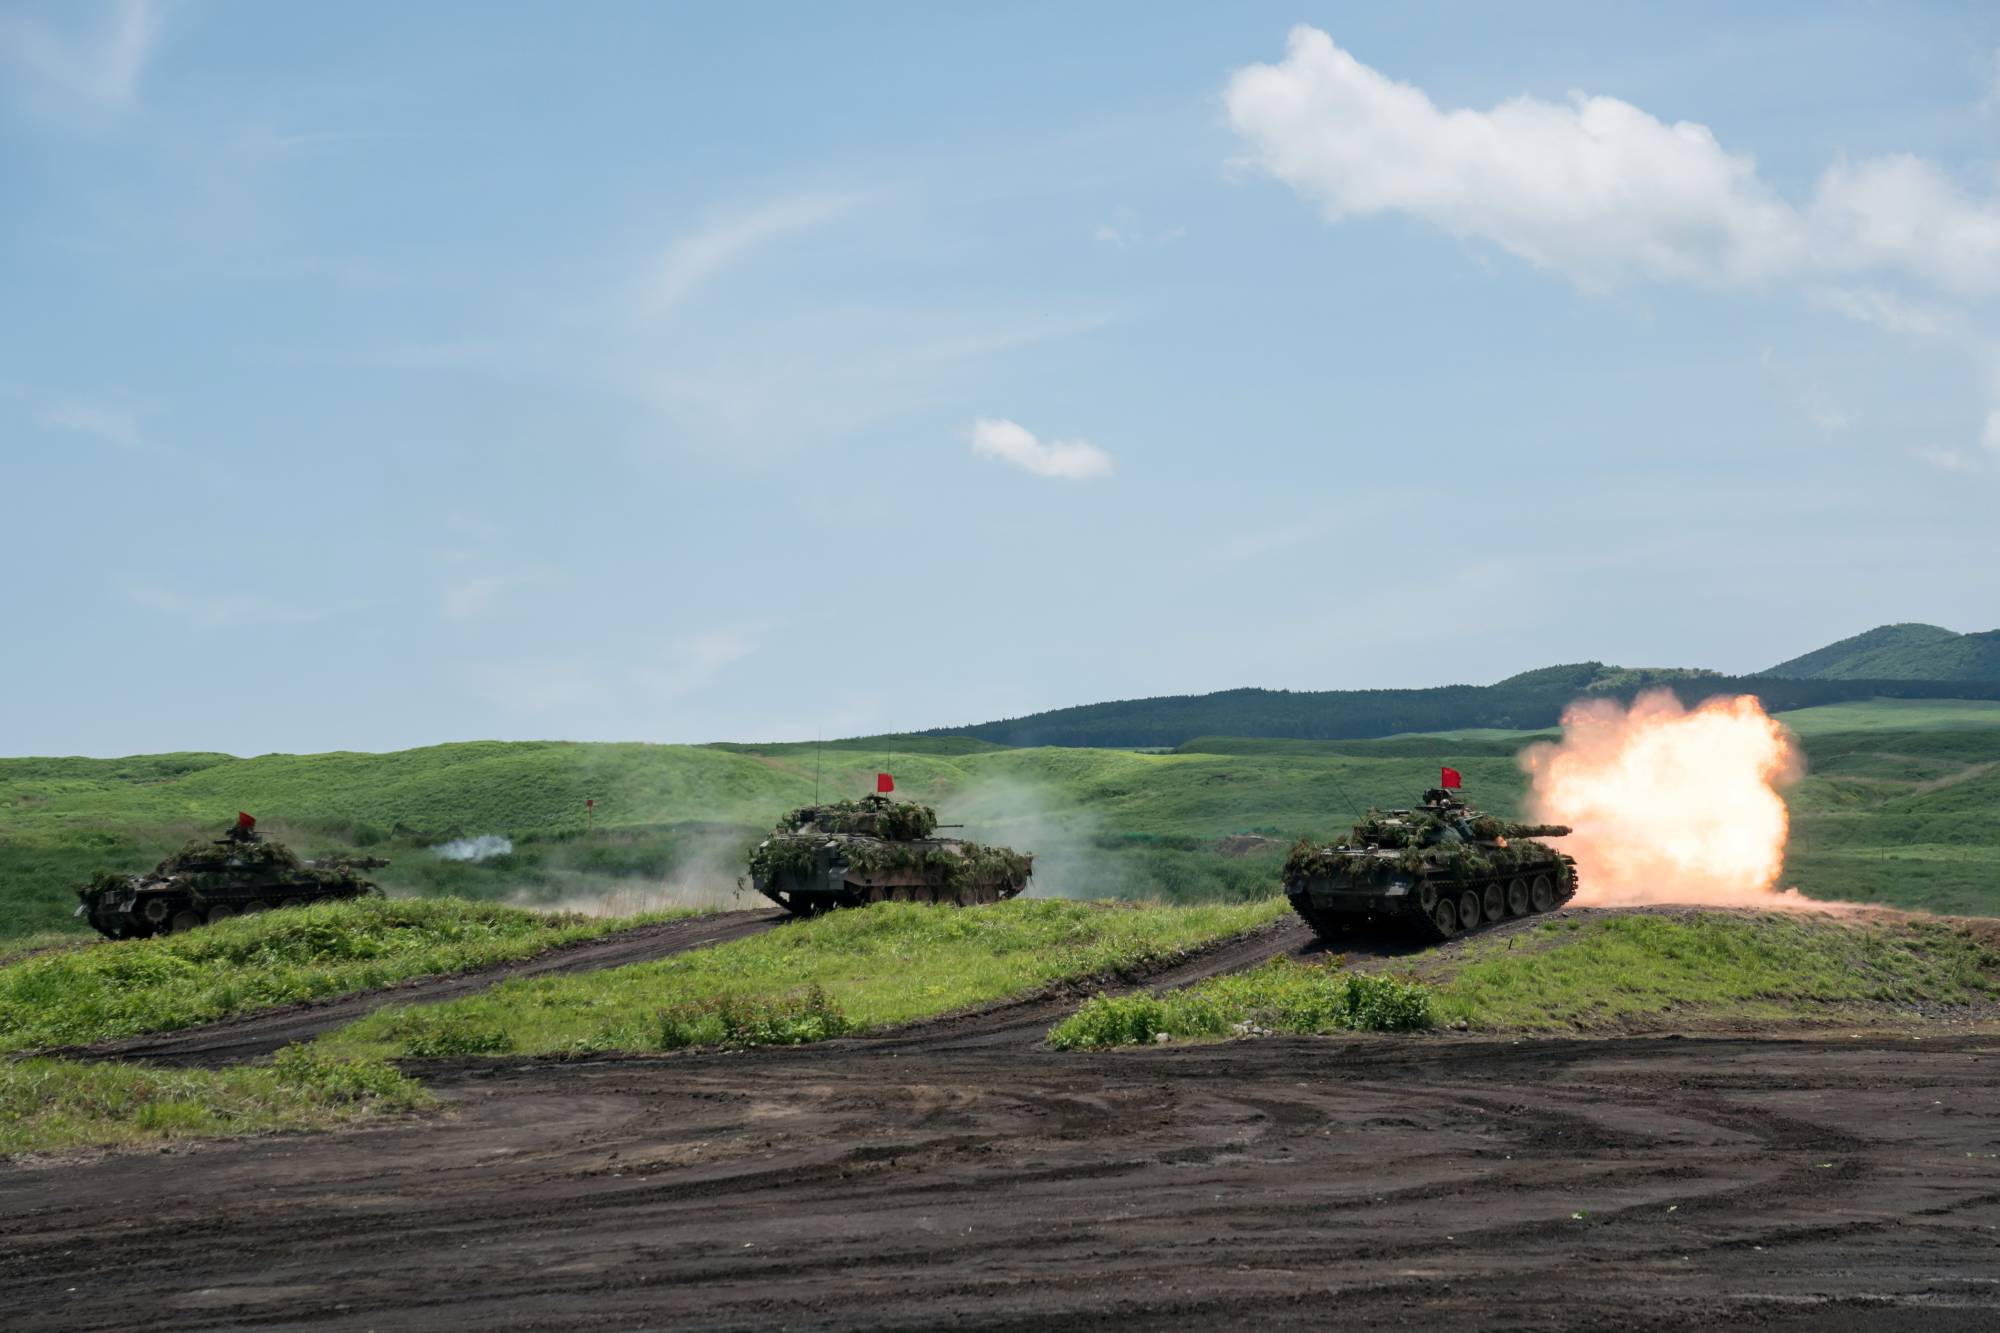 A Ground Self-Defense Force battle tank fires ammunition during a live-fire exercise at East Fuji Maneuver Area in Gotemba, Shizuoka Prefecture, in May. | POOL / VIA REUTERS